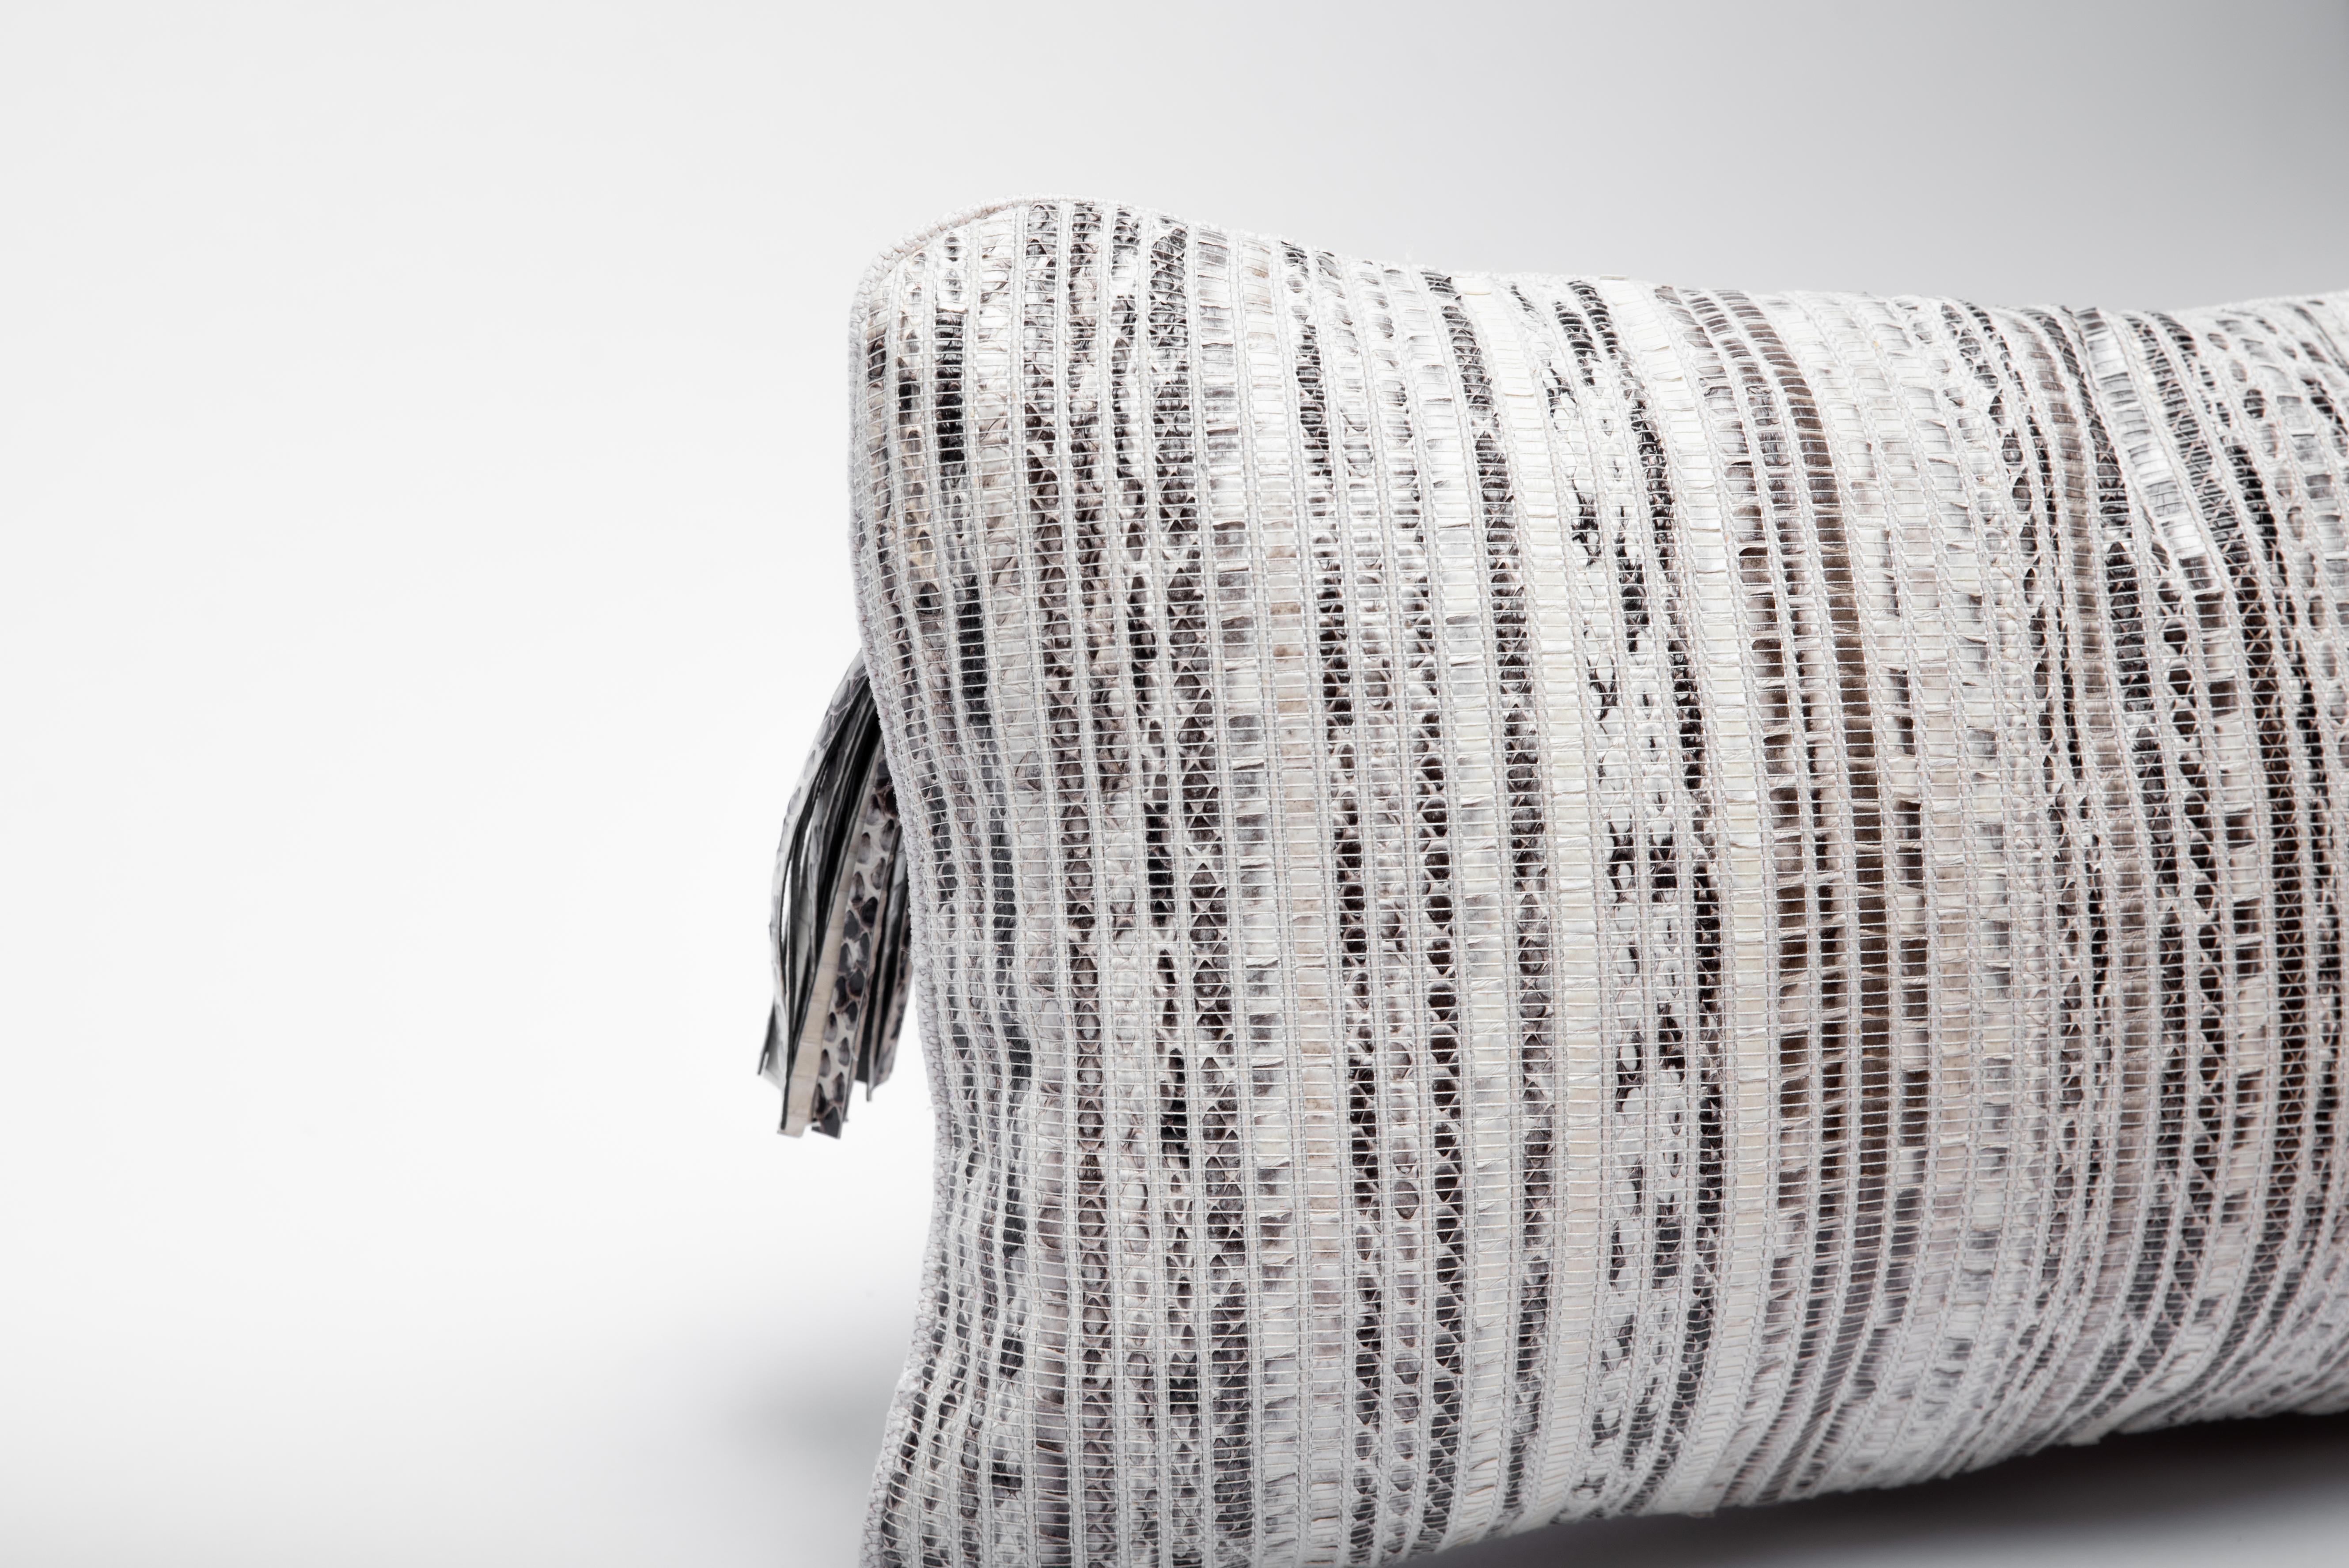 The woven snakeskin cushion by KIFU PARIS is the ultimate luxury home textile piece. This textile is unique and original to the brand, who uses traditional weaving techniques with wooden looms to develop this supple and exotic textile. The back is